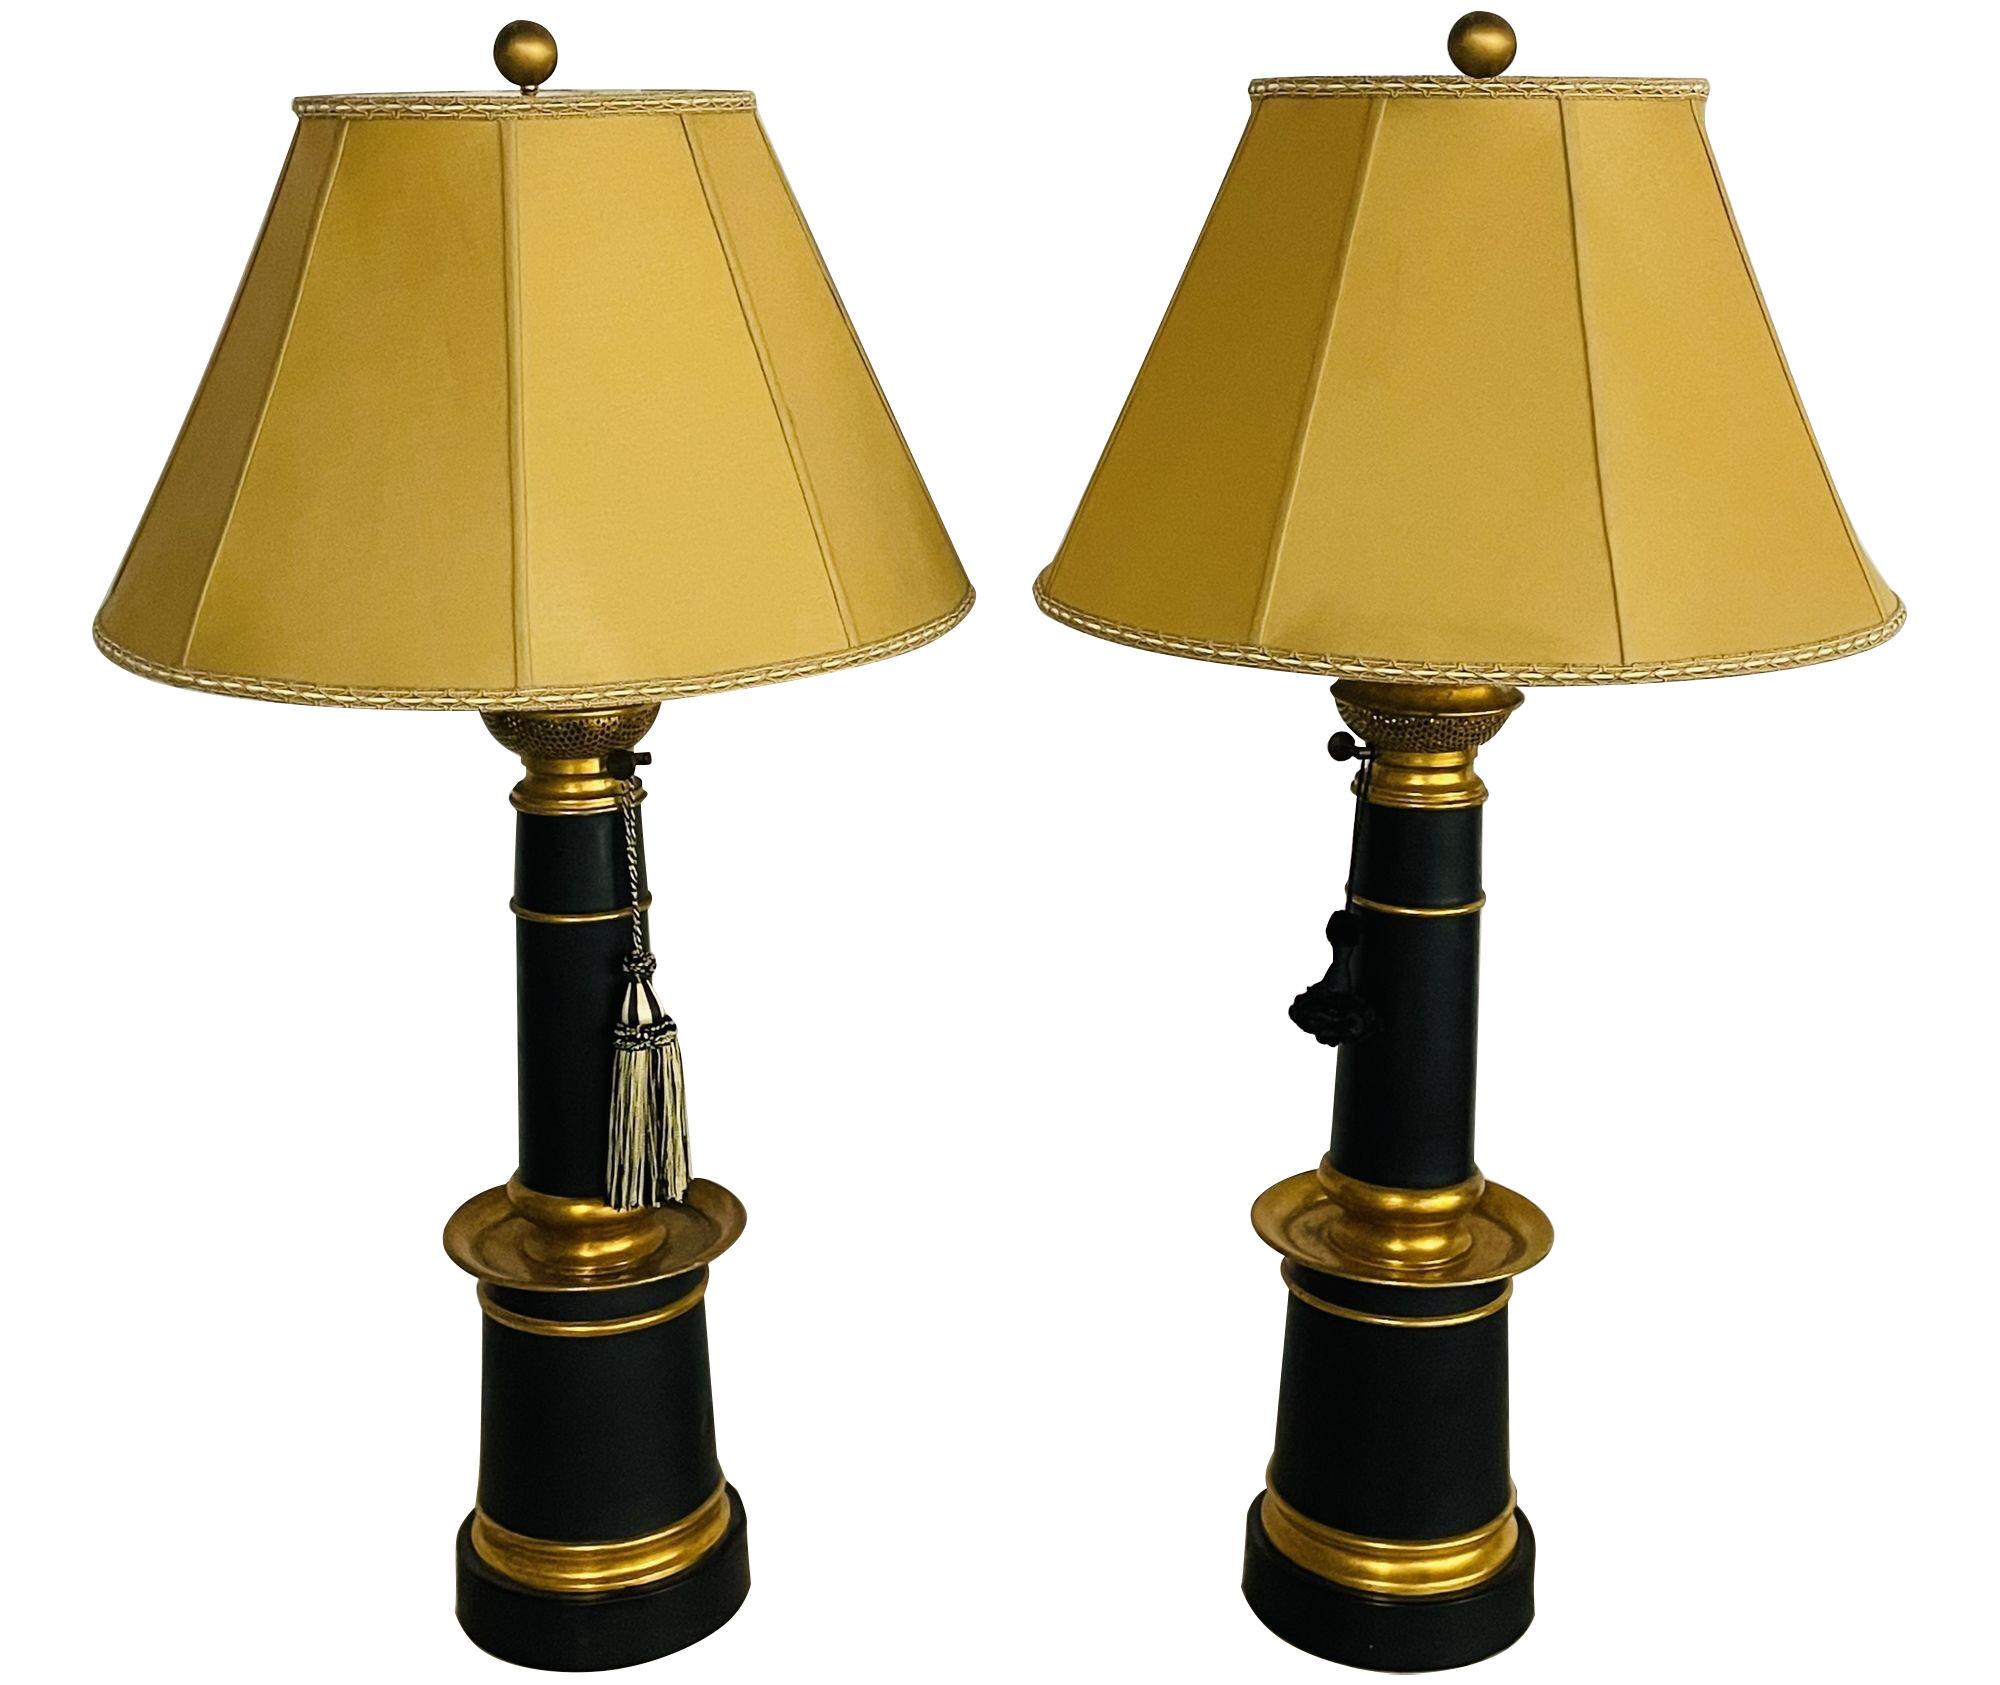 Pair of Hollywood Regency Style Table Lamps with Custom Shades, Ebony and Gilt